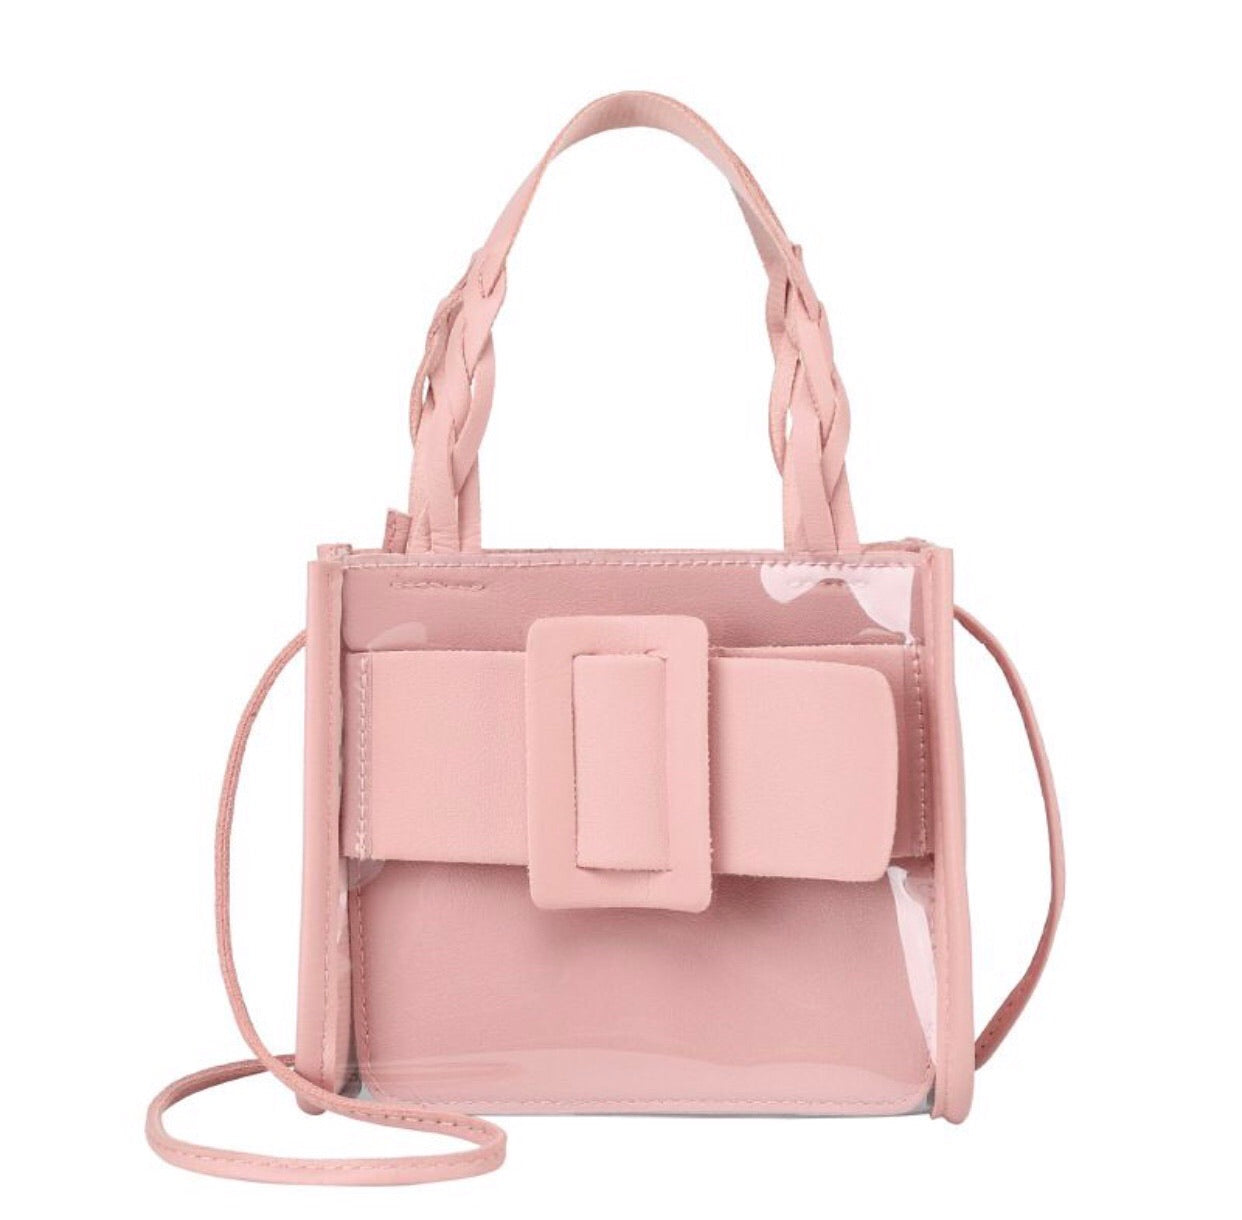 Right On Cue Fringe Crossbody In Pink • Impressions Online Boutique